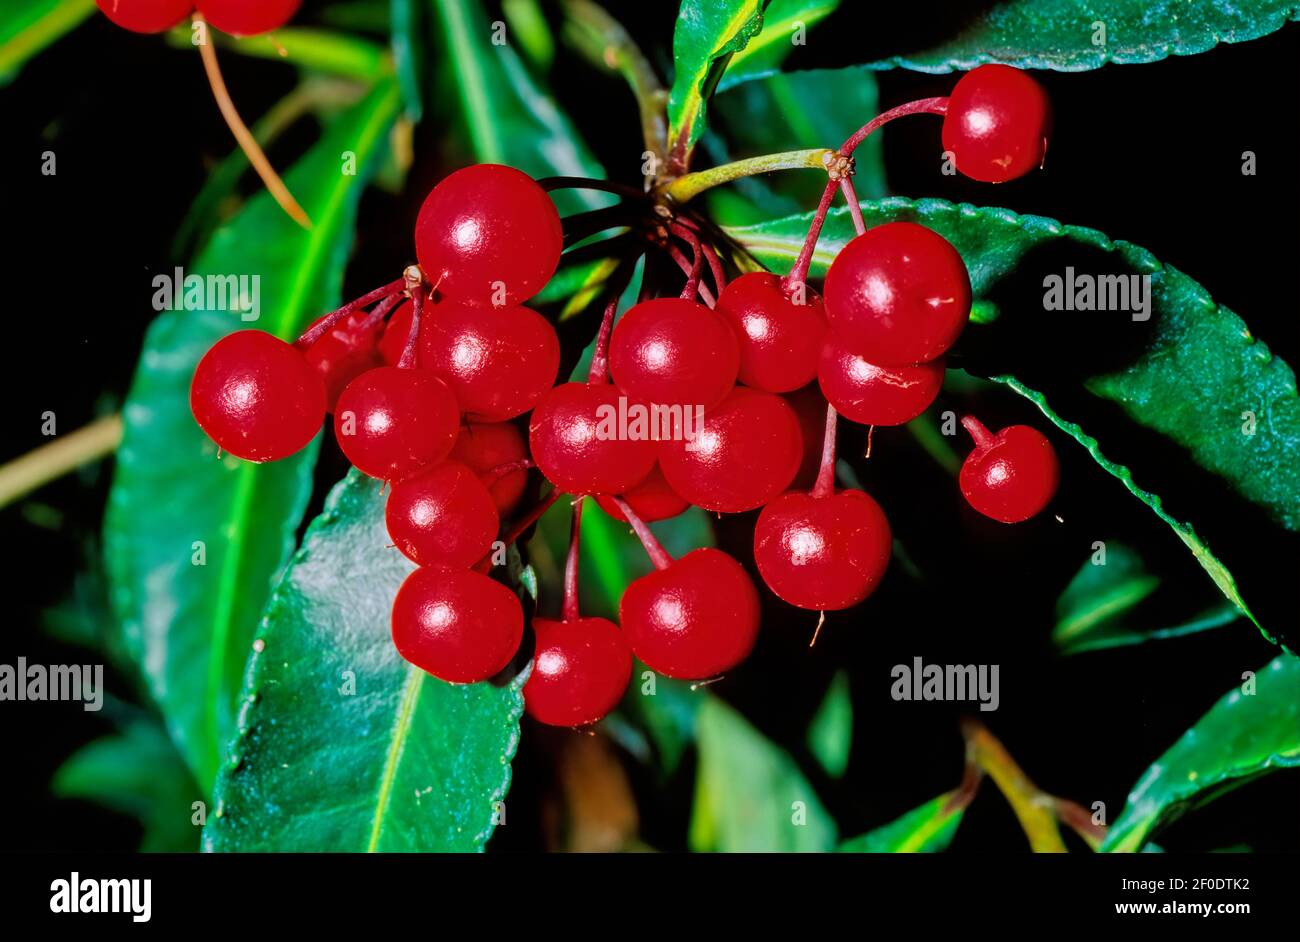 Ardisia crenata is a species of flowering plant in the primrose family, Primulaceae, that is native to East Asia. Stock Photo